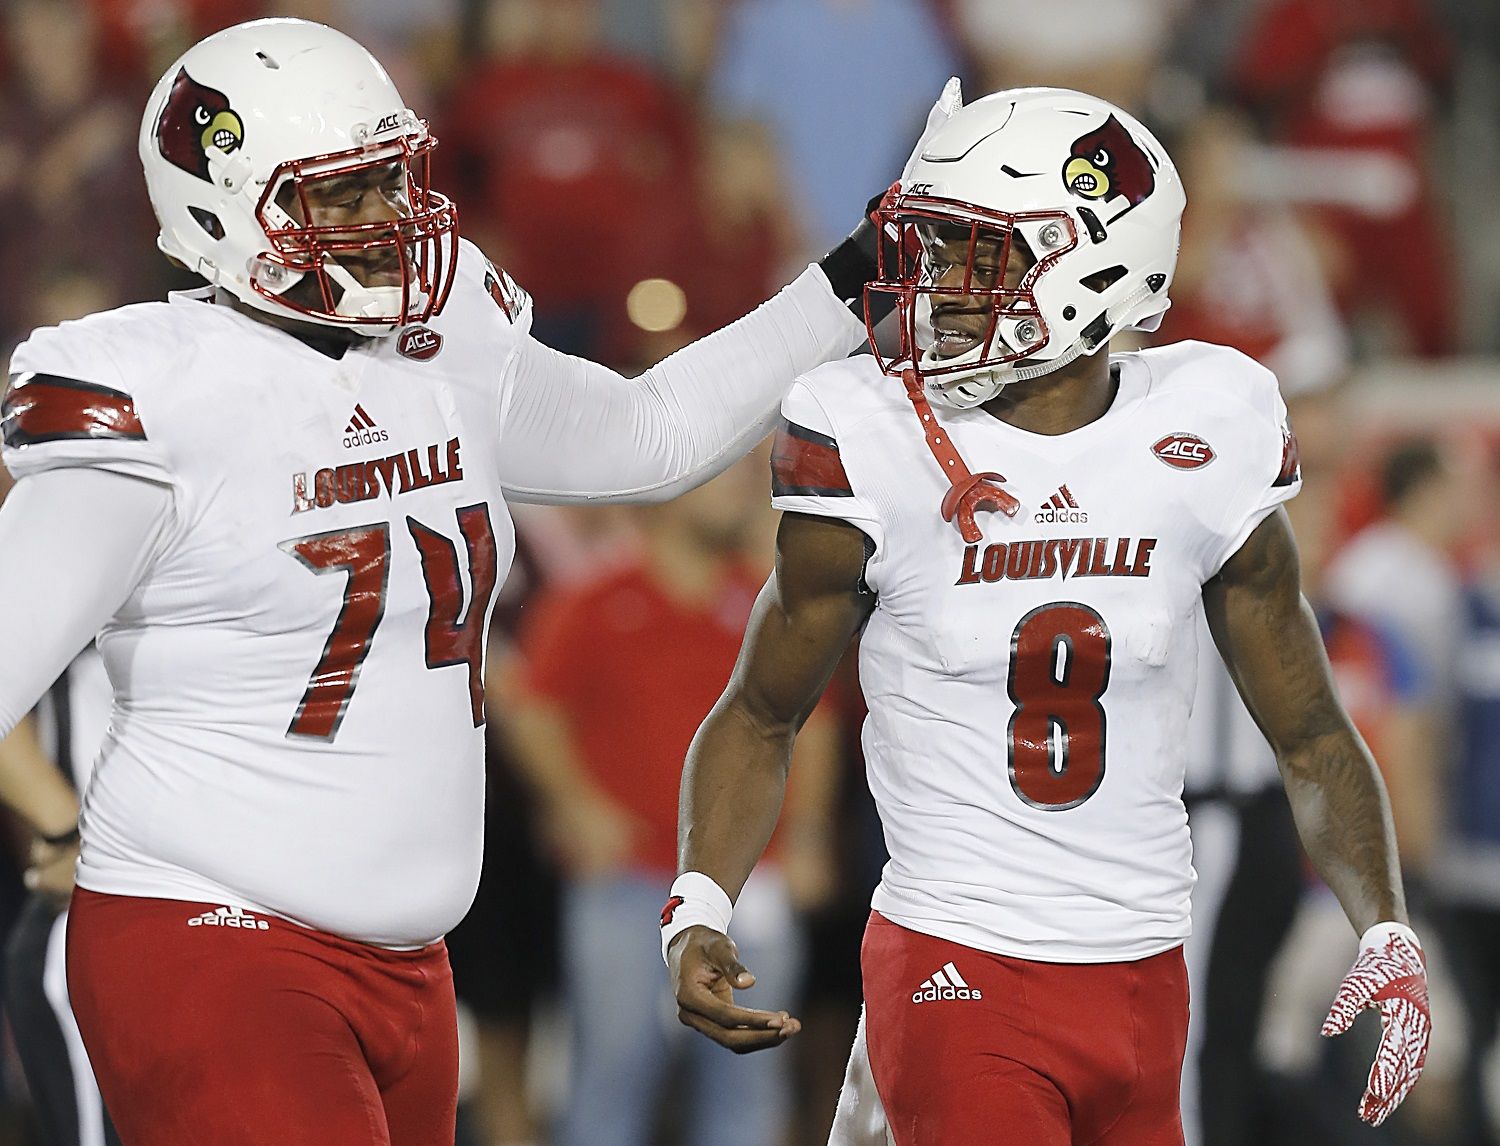 HOUSTON, TX - NOVEMBER 17: Offensive lineman Geron Christian #74 taps the head of quarterback Lamar Jackson #8 of the Louisville Cardinals while he walks off the field against the Houston Cougars in the second quarter at TDECU Stadium on November 17, 2016 in Houston, Texas. (Photo by Thomas B. Shea/Getty Images)